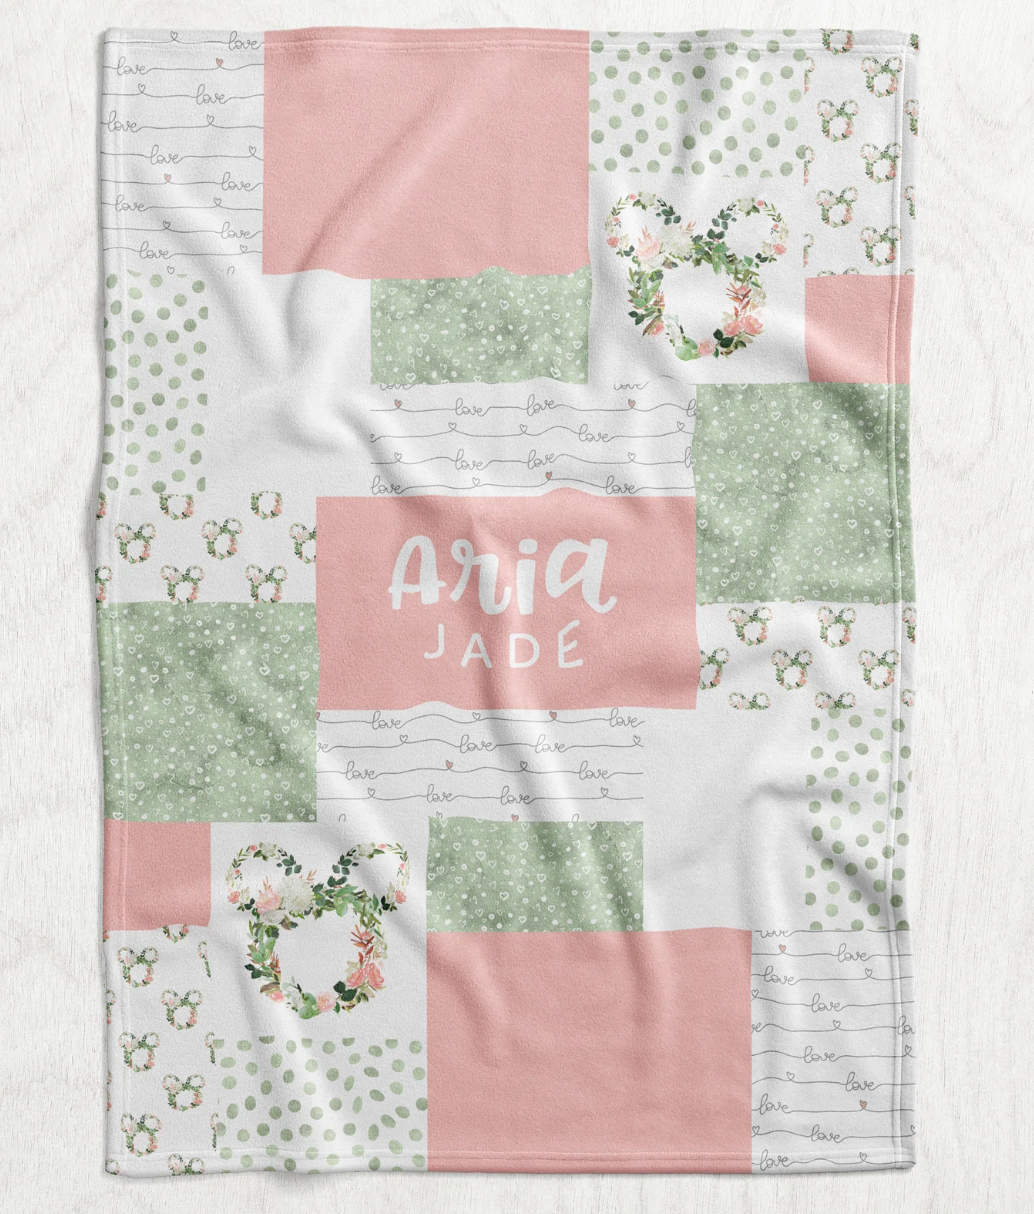 Personalized Girl's Boho Minnie Blanket - Boho Floral Minnie Mouse Inspired Faux Quilt Style Plush Minky Blanket